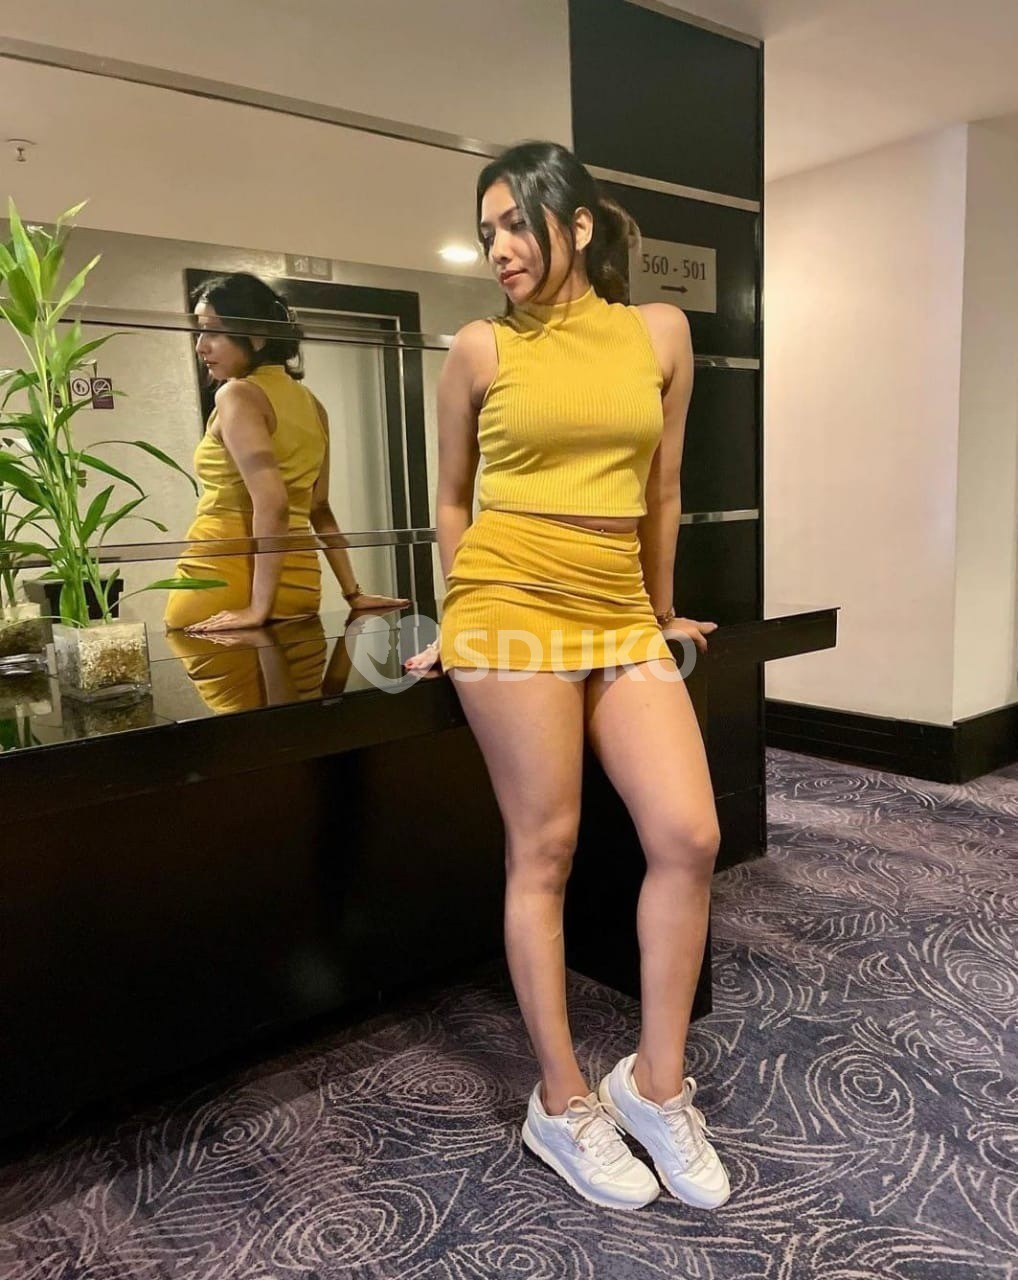 Genuine ⏩ Paharganj available ✅ (24x7) AFFORDABLE CHEAPEST RATE SAFE CALL GIRL SERVICE AVAILABLE OUTCALL AVAILABLE..